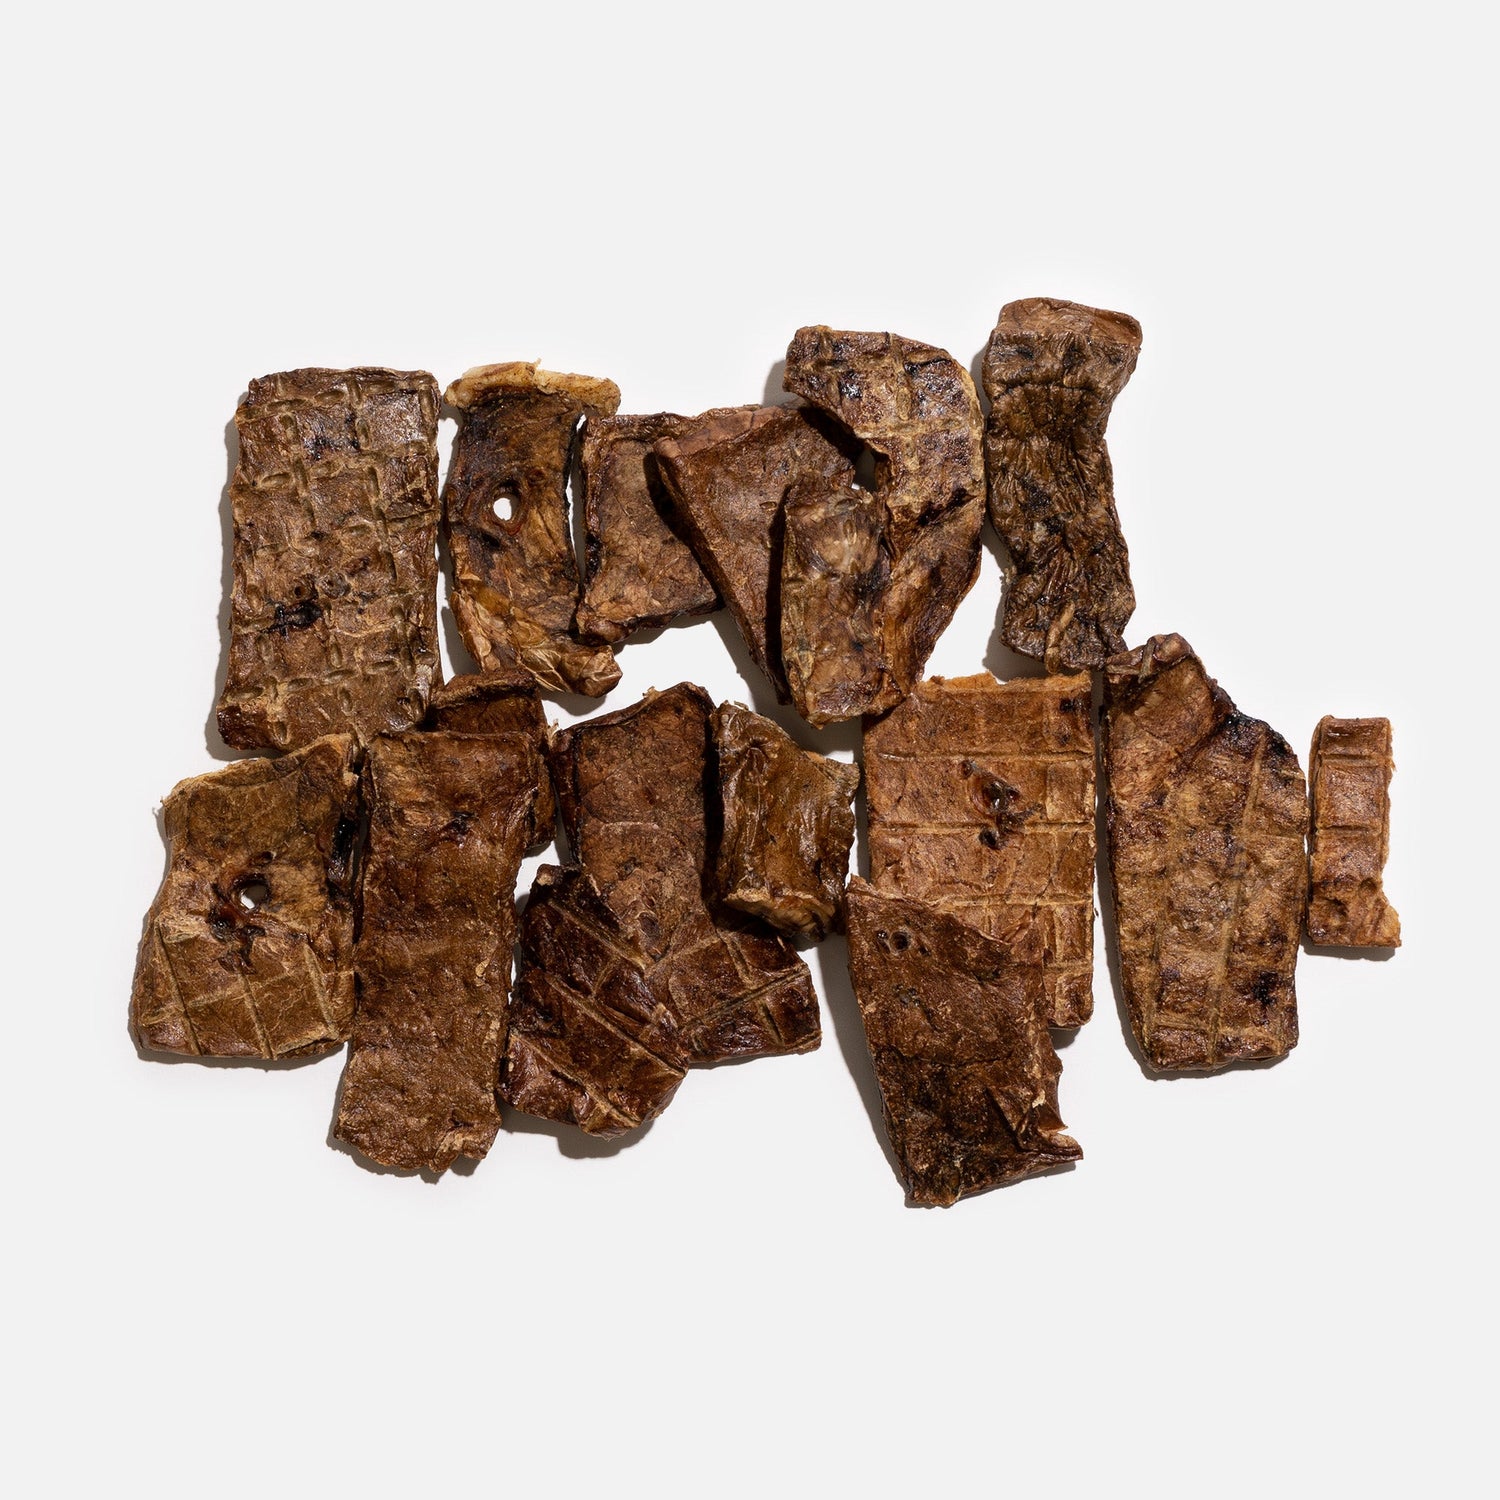 Dr. Kelly The Vet 100% Natural Dog Treats - Beef - Silver Paw